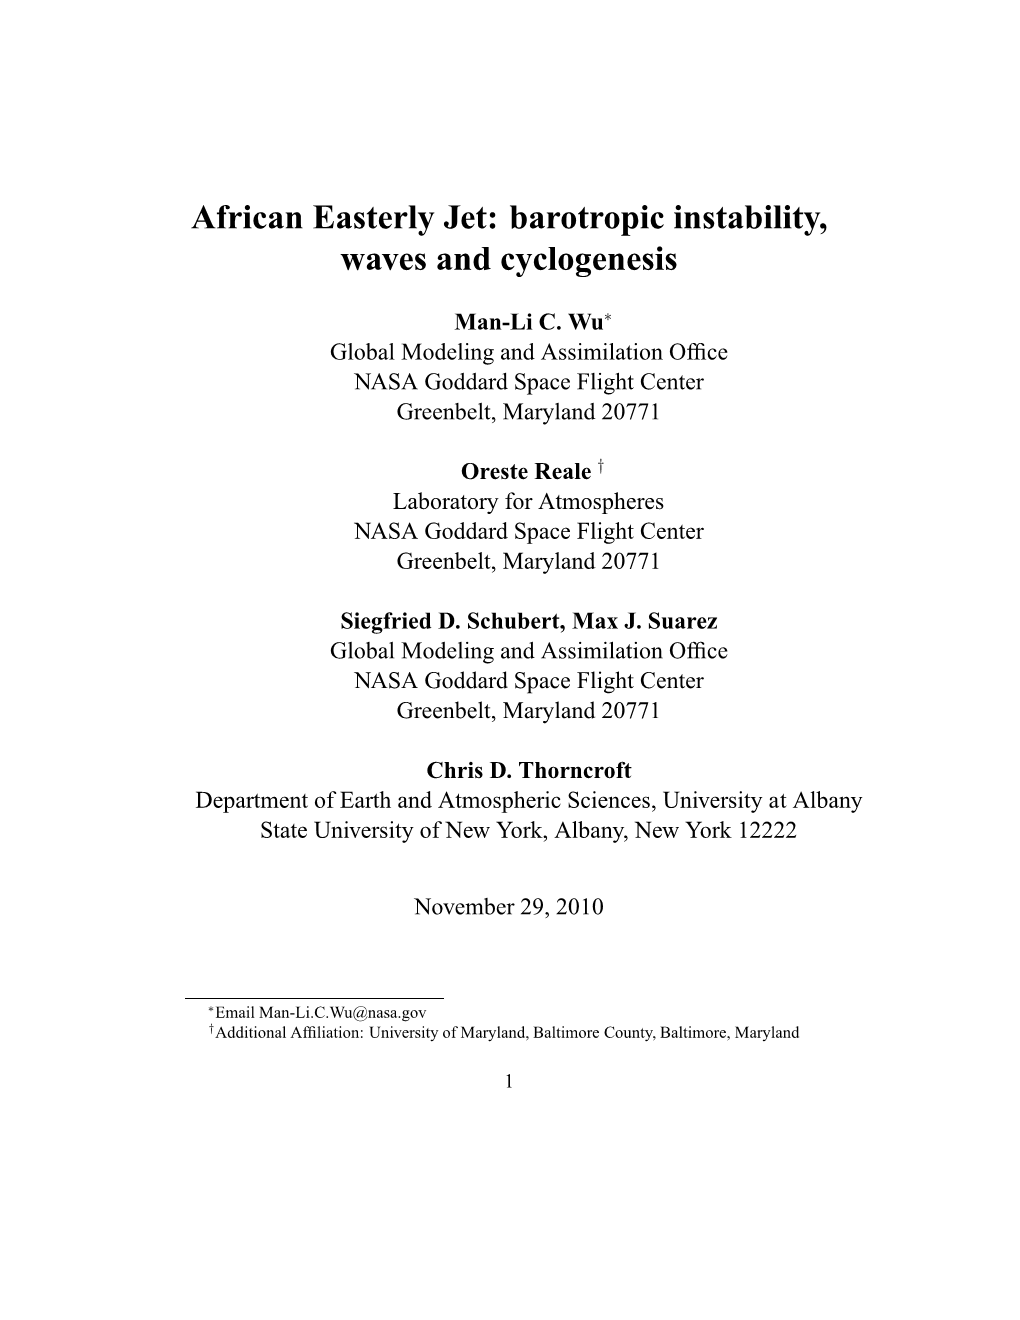 African Easterly Jet: Barotropic Instability, Waves and Cyclogenesis